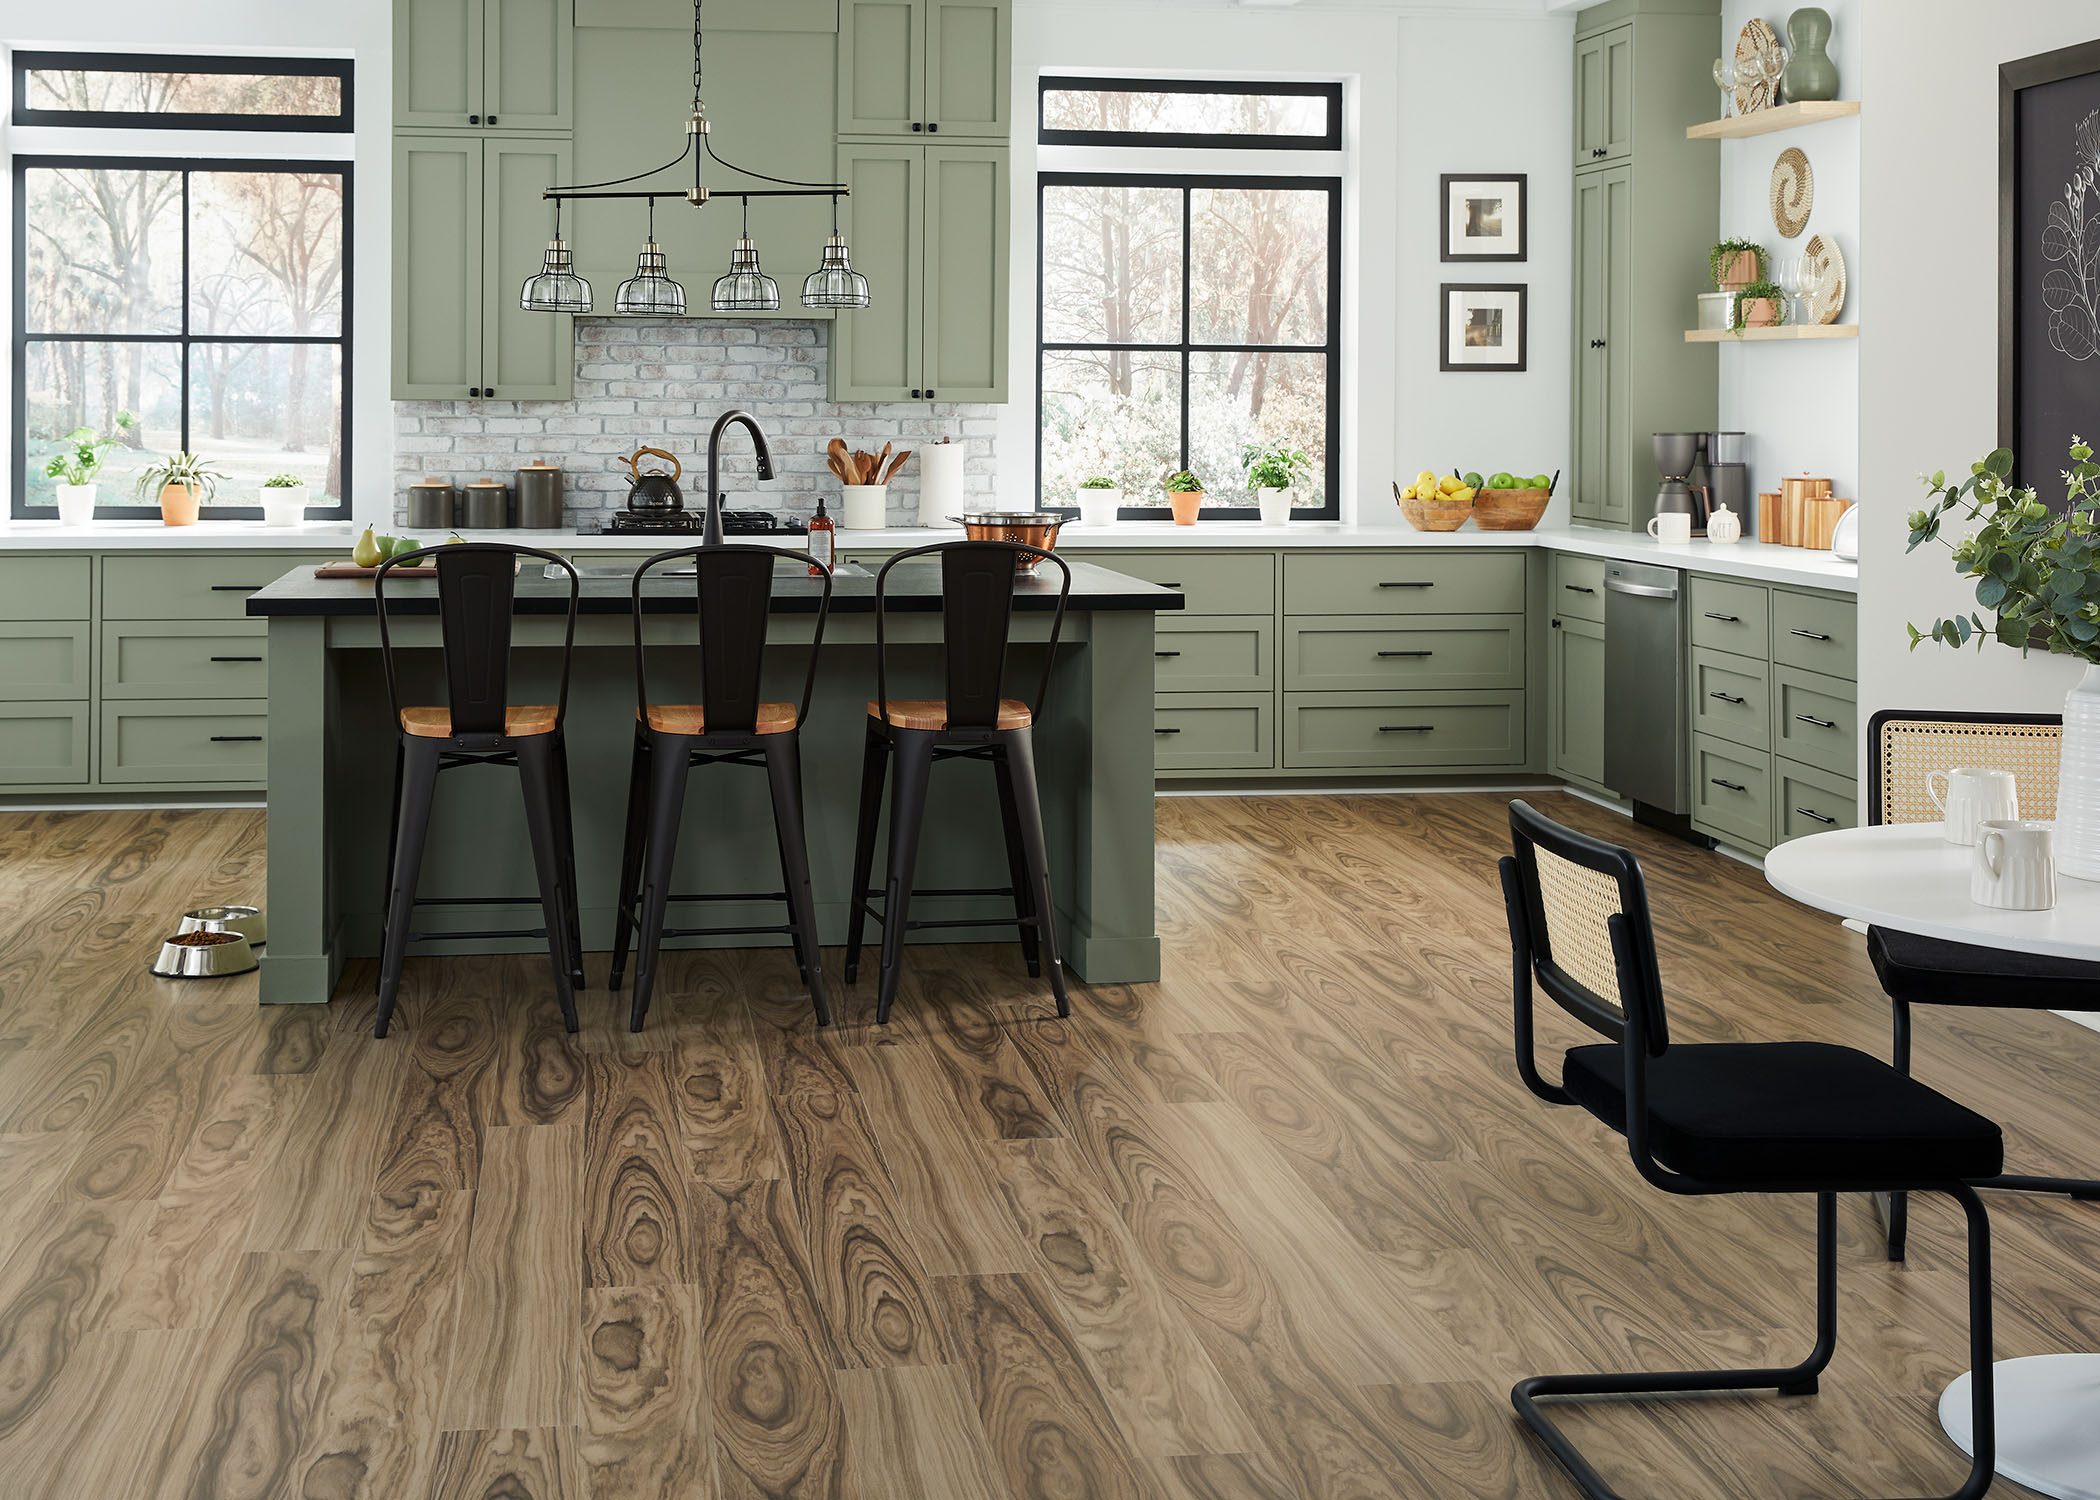 medium brown waterproof rigid vinyl plank floor in kitchen with green cabinets and island plus black metal bar stools with light wood seats and dog bowls on floor and round white dining table and black metal chairs